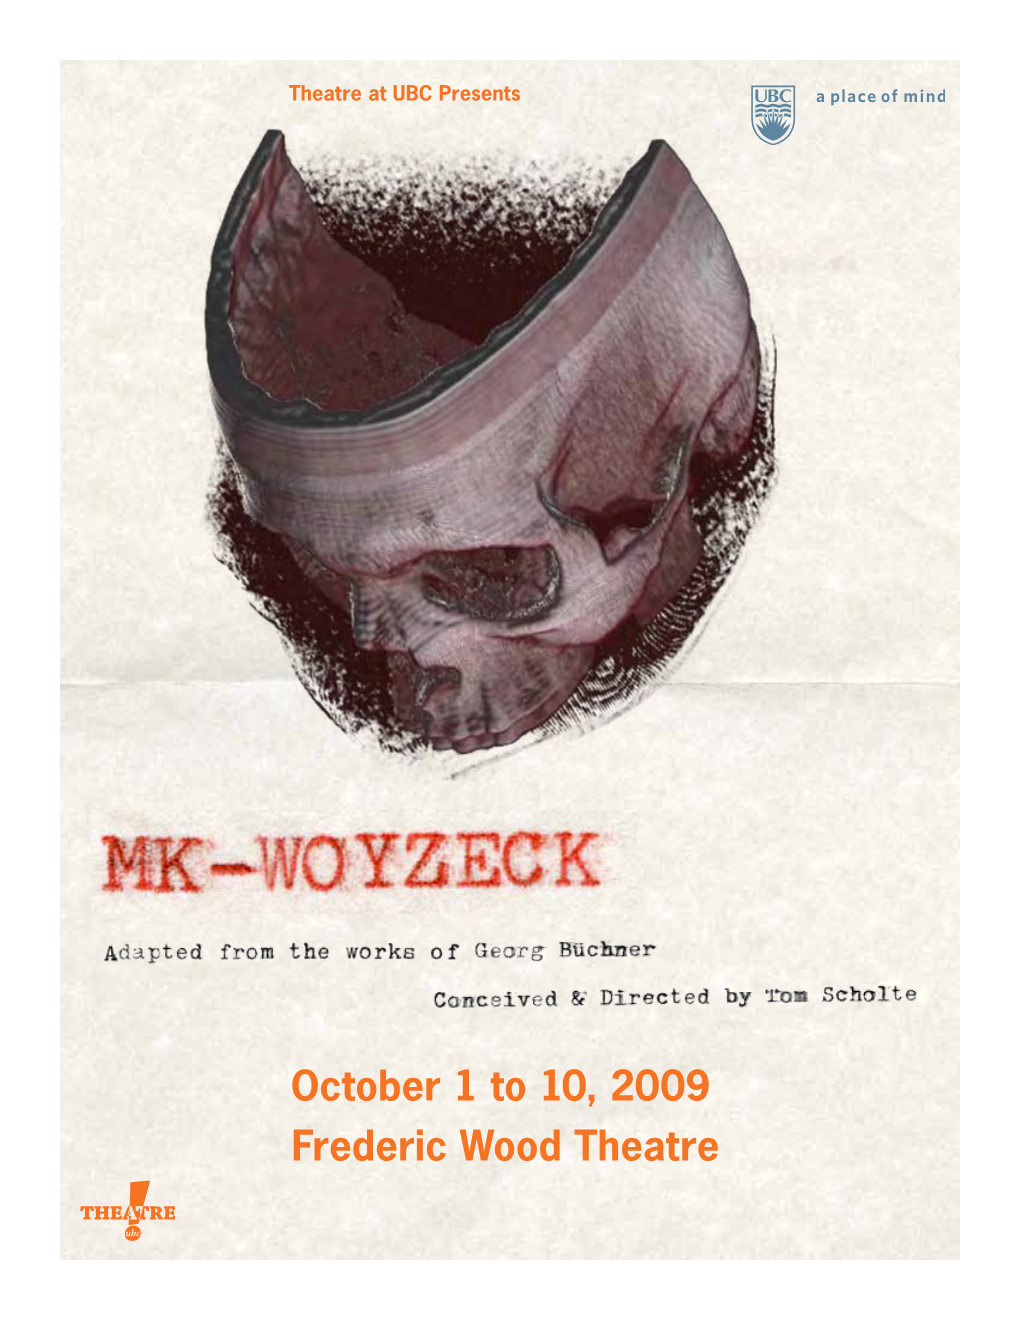 MK-Woyzeck Adapted from the Works of Georg Büchner